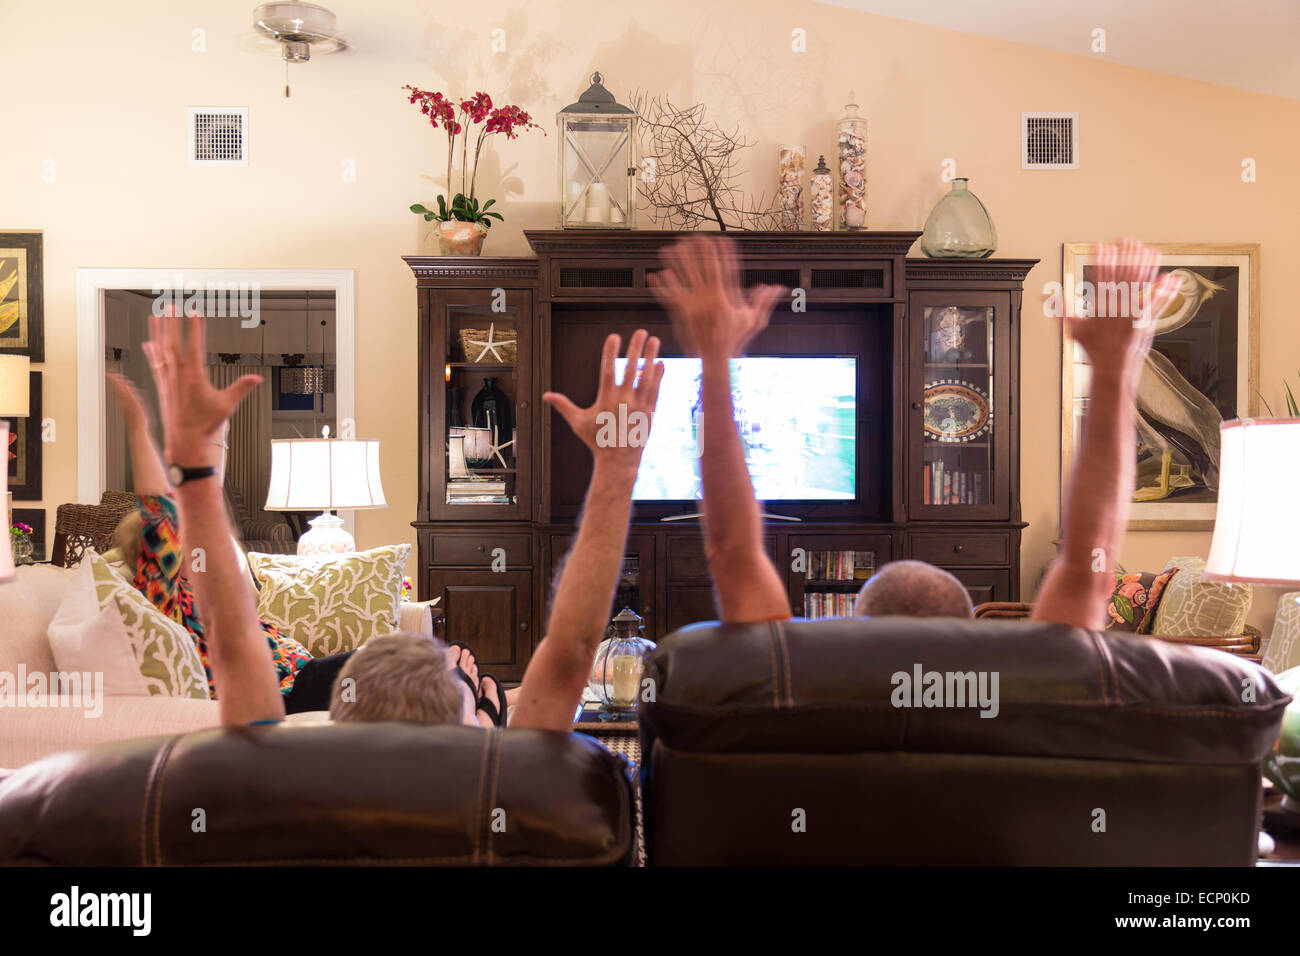 Mature Friends Watching Football Game an Gesturing Touchdown on TV Stock  Photo - Alamy